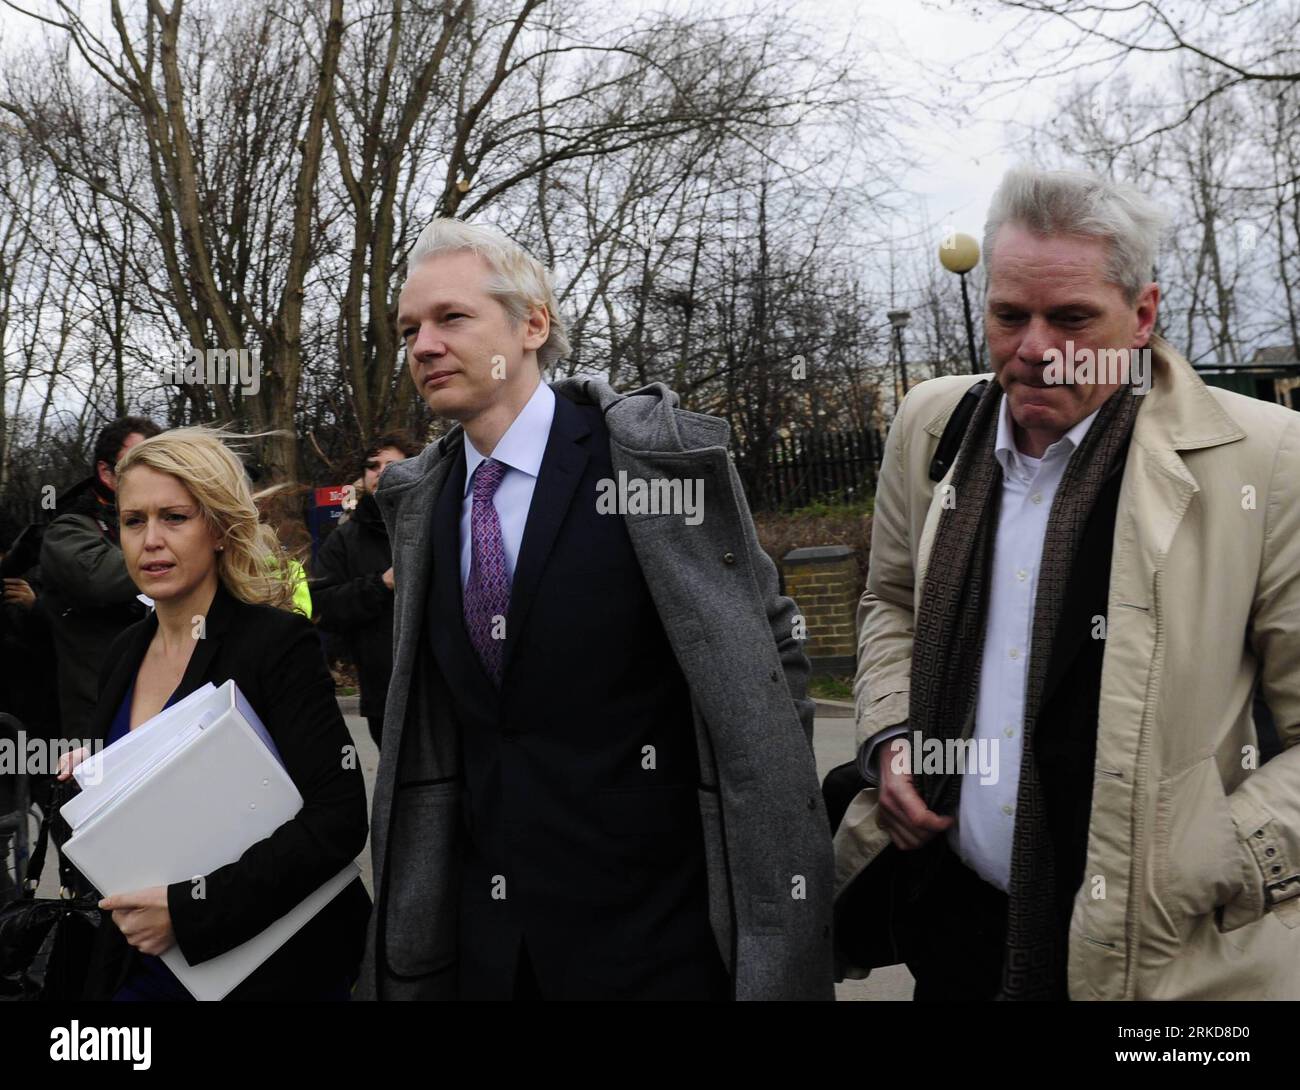 Bildnummer: 54885774  Datum: 07.02.2011  Copyright: imago/Xinhua (110207) -- LONDON, Feb. 7, 2011 (Xinhua) -- Wikileaks founder Julian Assange (C) arrives at Belmarsh Magistrates Court in London to attend a two-day final hearing examining his extradition to Sweden, Feb. 7, 2011. (Xinhua/Zeng Yi) (djj) BRITAIN-WIKILEAKS-ASSANGE-HEARING PUBLICATIONxNOTxINxCHN People Politik kbdig xdp 2011 quer premiumd     Bildnummer 54885774 Date 07 02 2011 Copyright Imago XINHUA  London Feb 7 2011 XINHUA wikileaks Founder Julian Assange C arrives AT Belmarsh Magistrates Court in London to attend a Two Day Fina Stock Photo